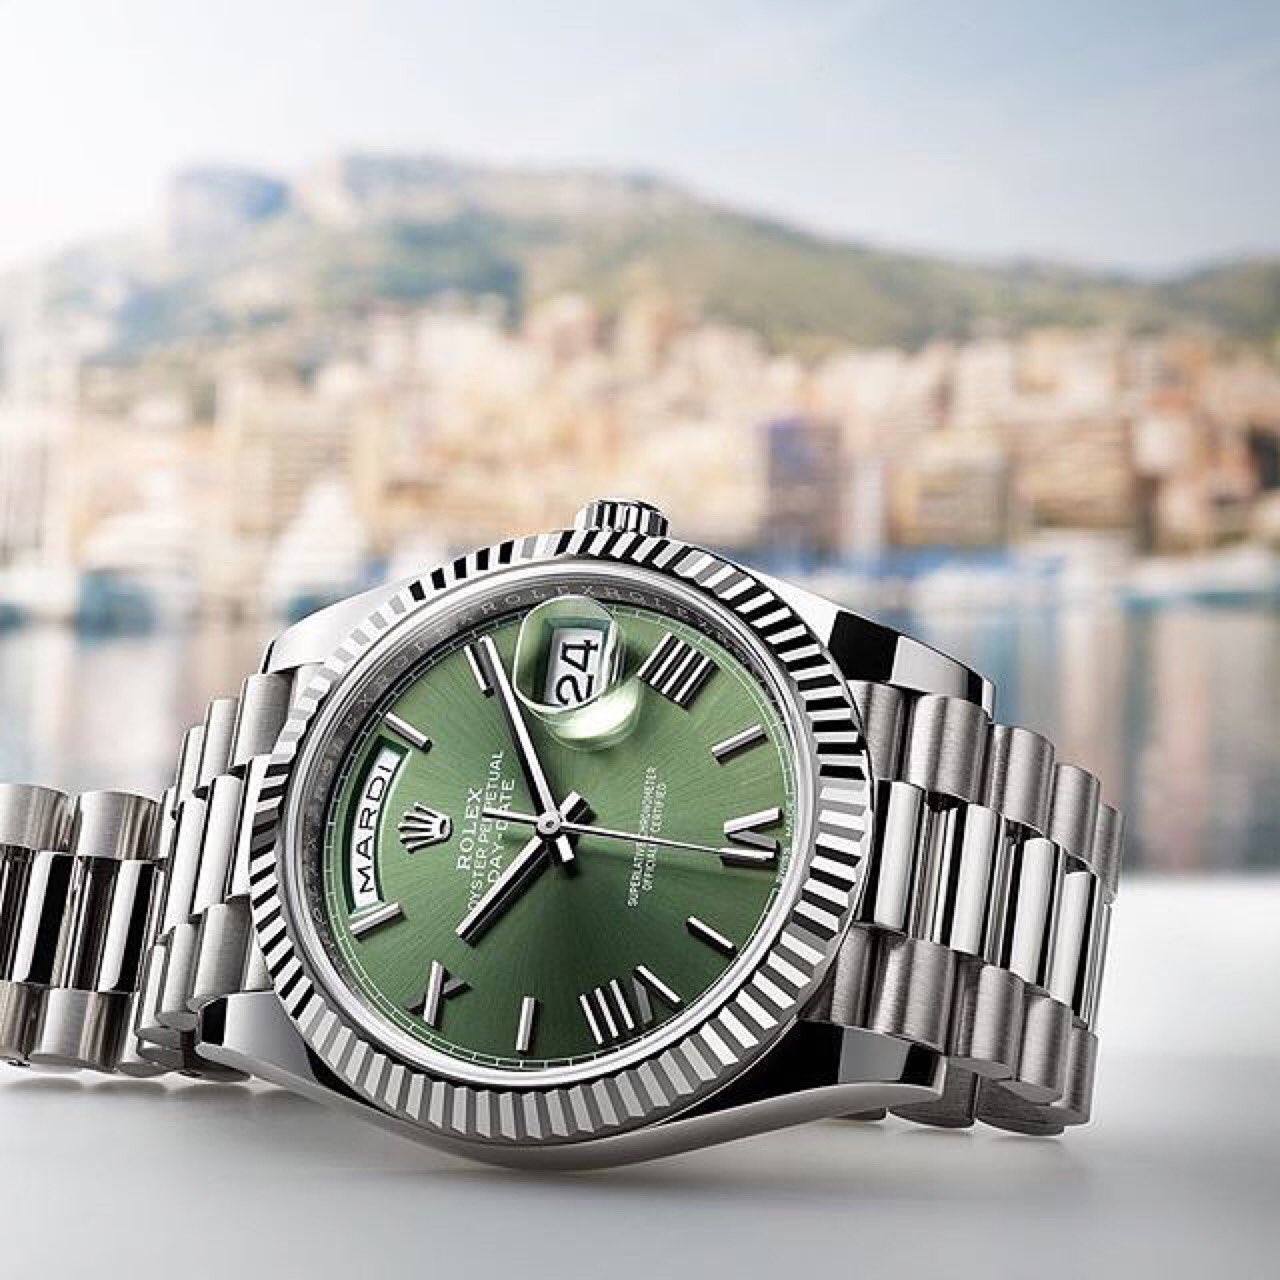 bleg rådgive Solskoldning Knar Jewellery on Twitter: "Mardi 24 avril. The Rolex Day-Date 40 in 18ct  white gold with an olive green dial features a weekday display that is  available in 26 languages. #Rolex #DayDate #